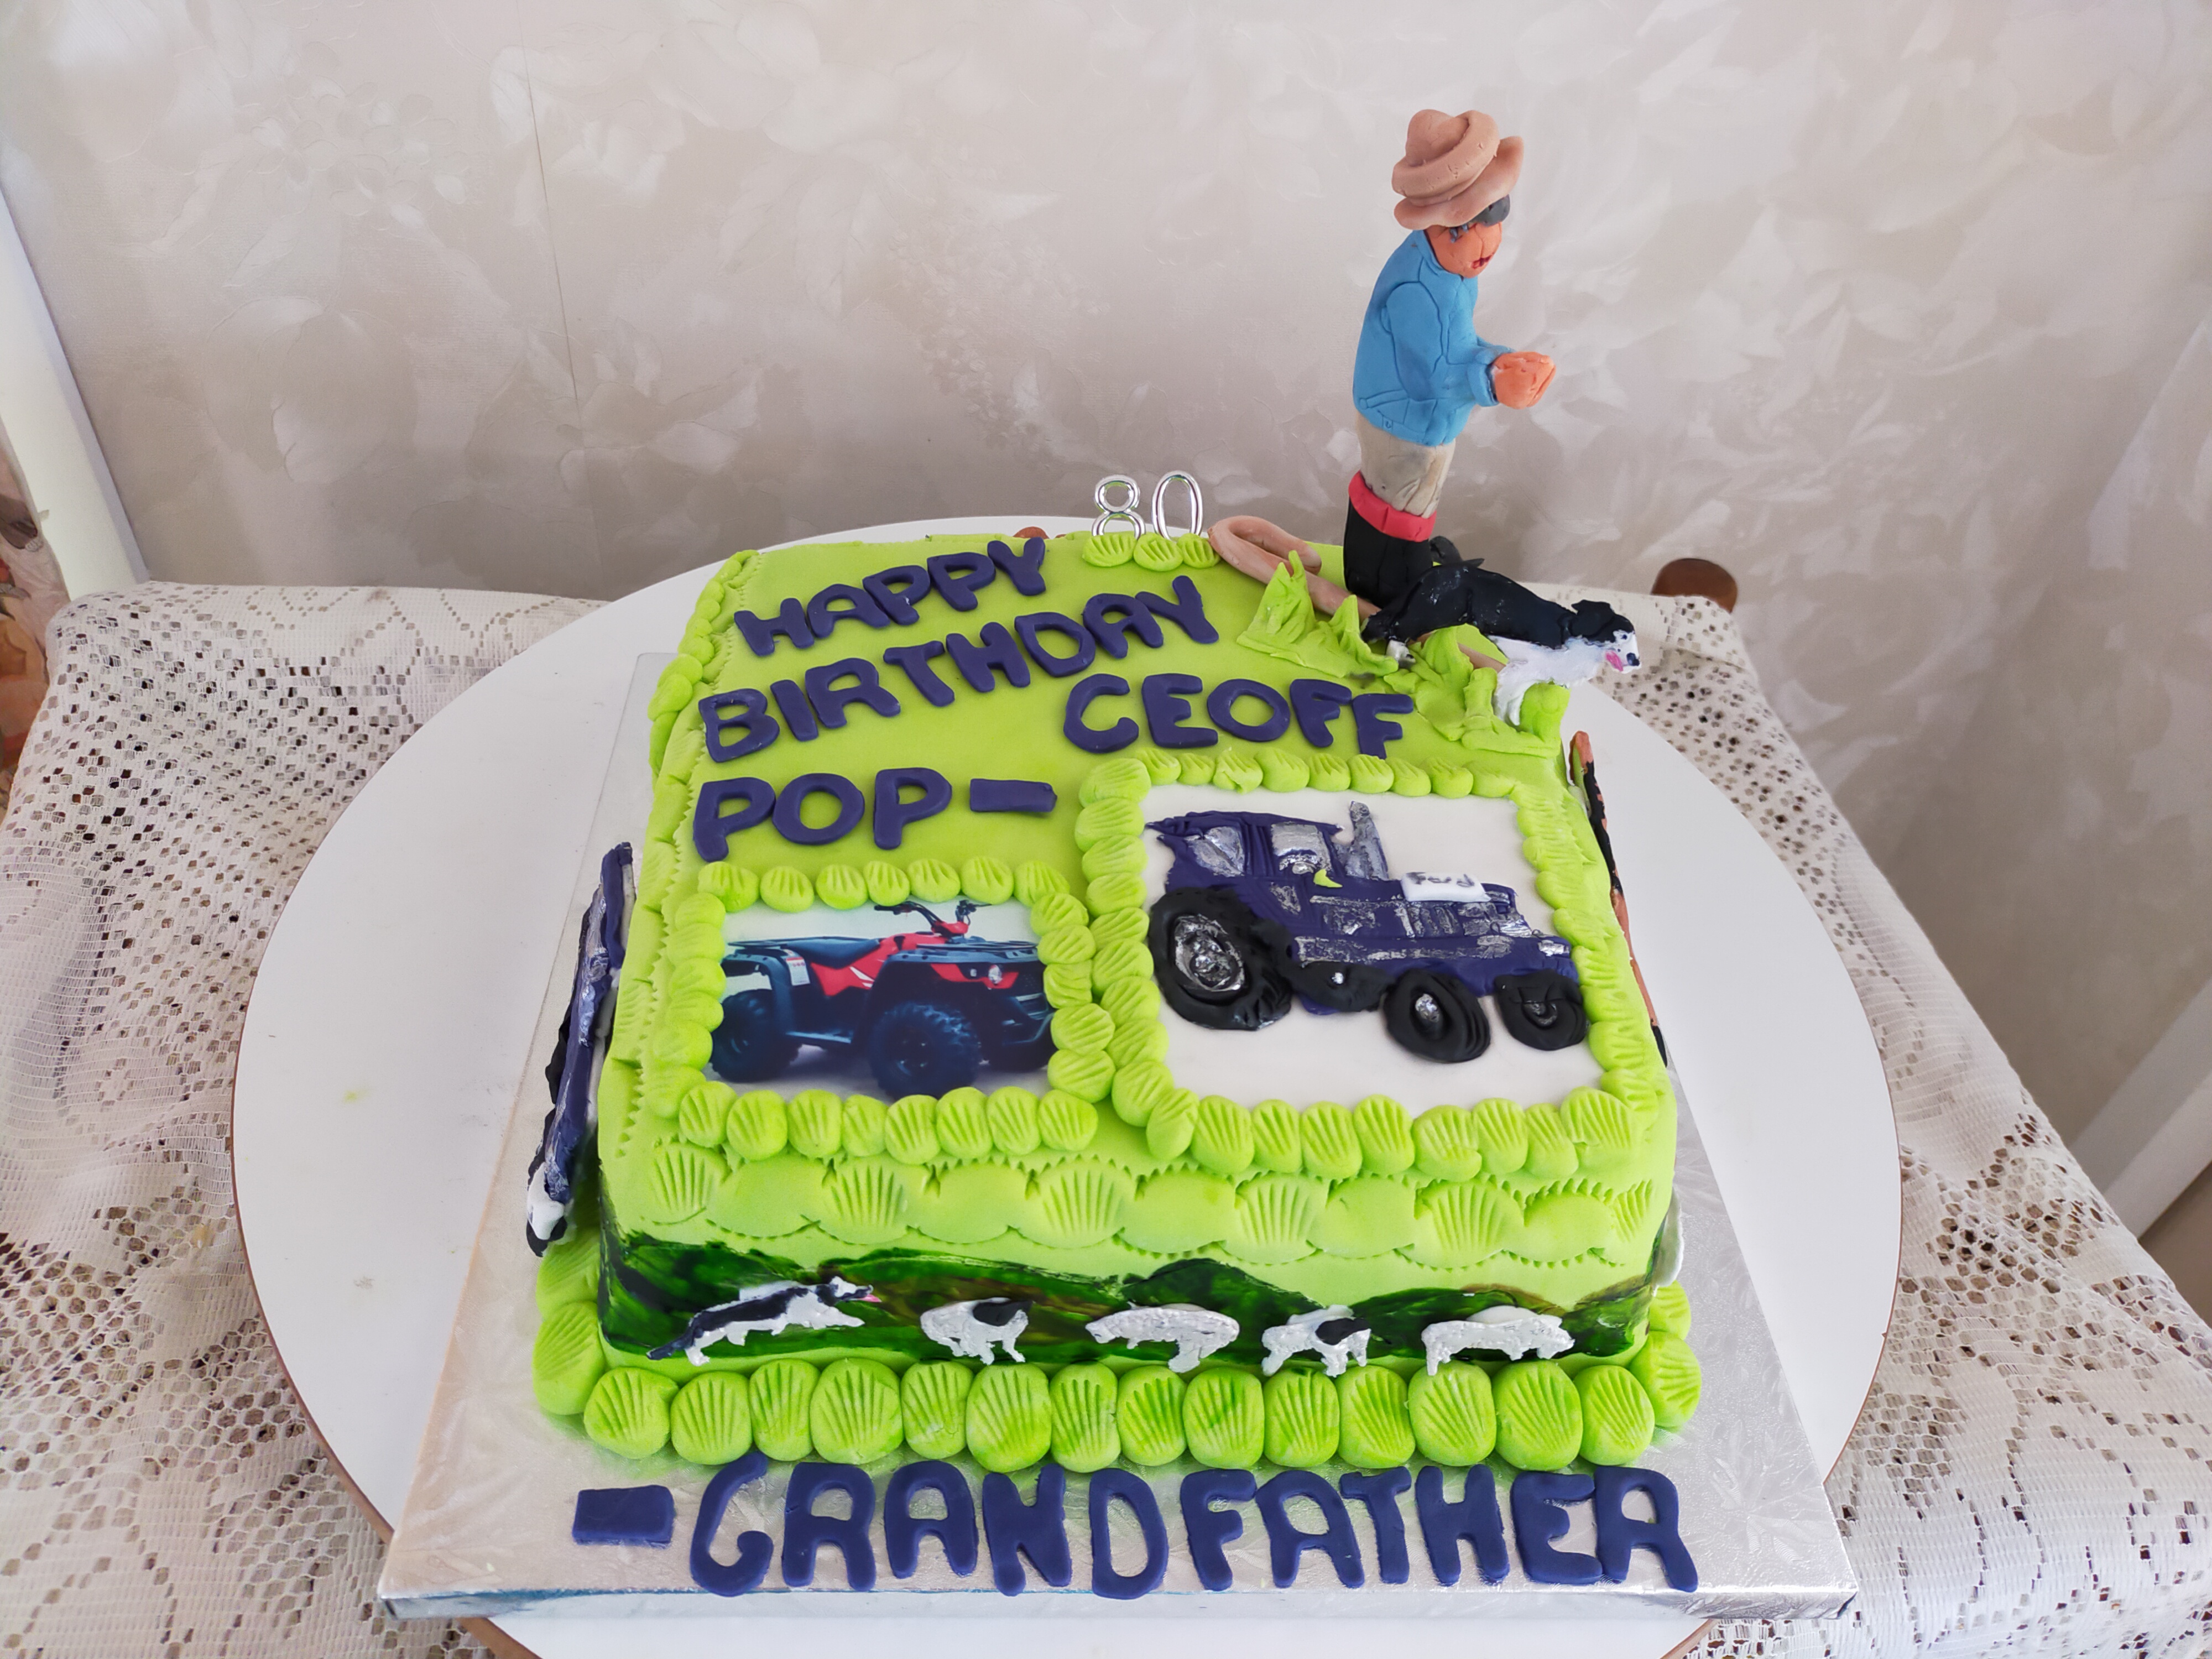 1_Geoff-top-of-cake-with-writing